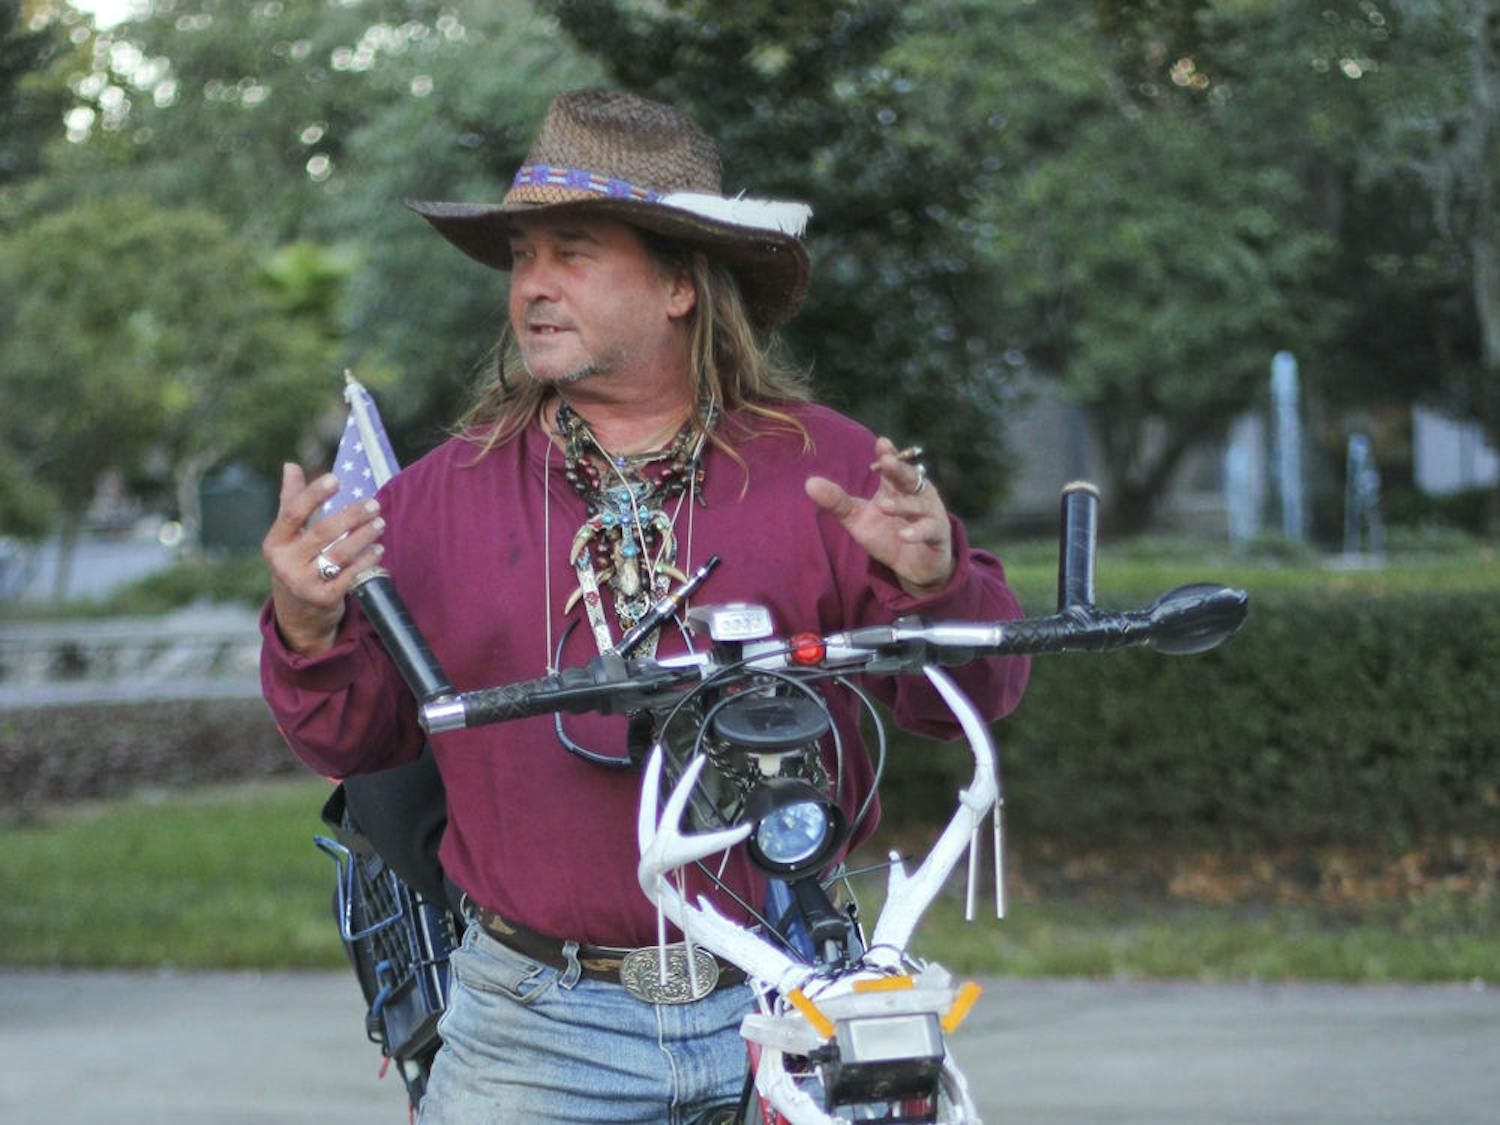 Chopper Dave, 51, pauses during his bike ride downtown Monday afternoon. “I MacGyver everything,” Dave said, adding that he “chopped out” his bike in only a week or so.